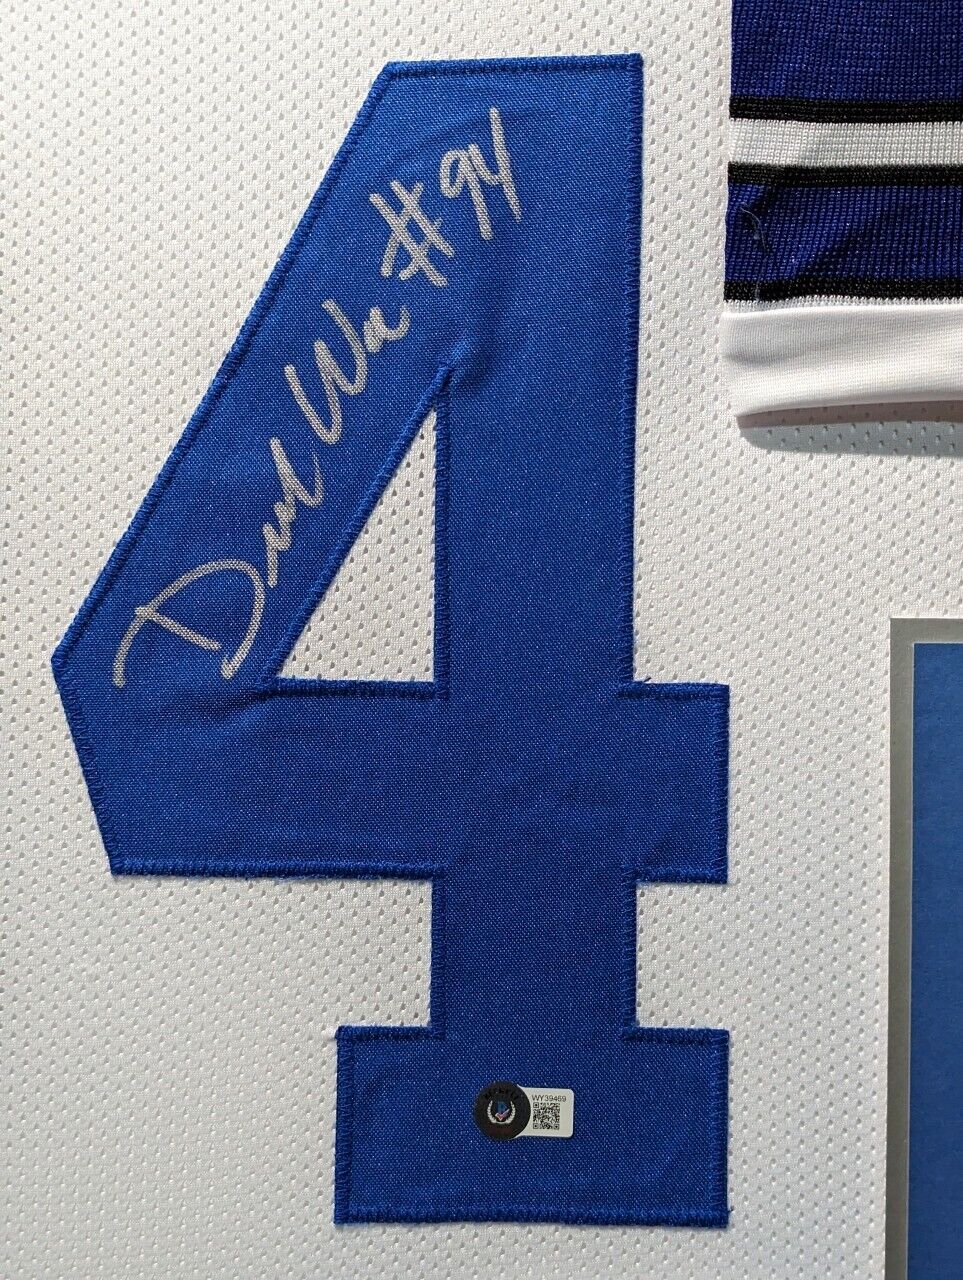 MVP Authentics Framed Dallas Cowboys Demarcus Ware Autographed Signed Jersey Beckett Holo 652.50 sports jersey framing , jersey framing